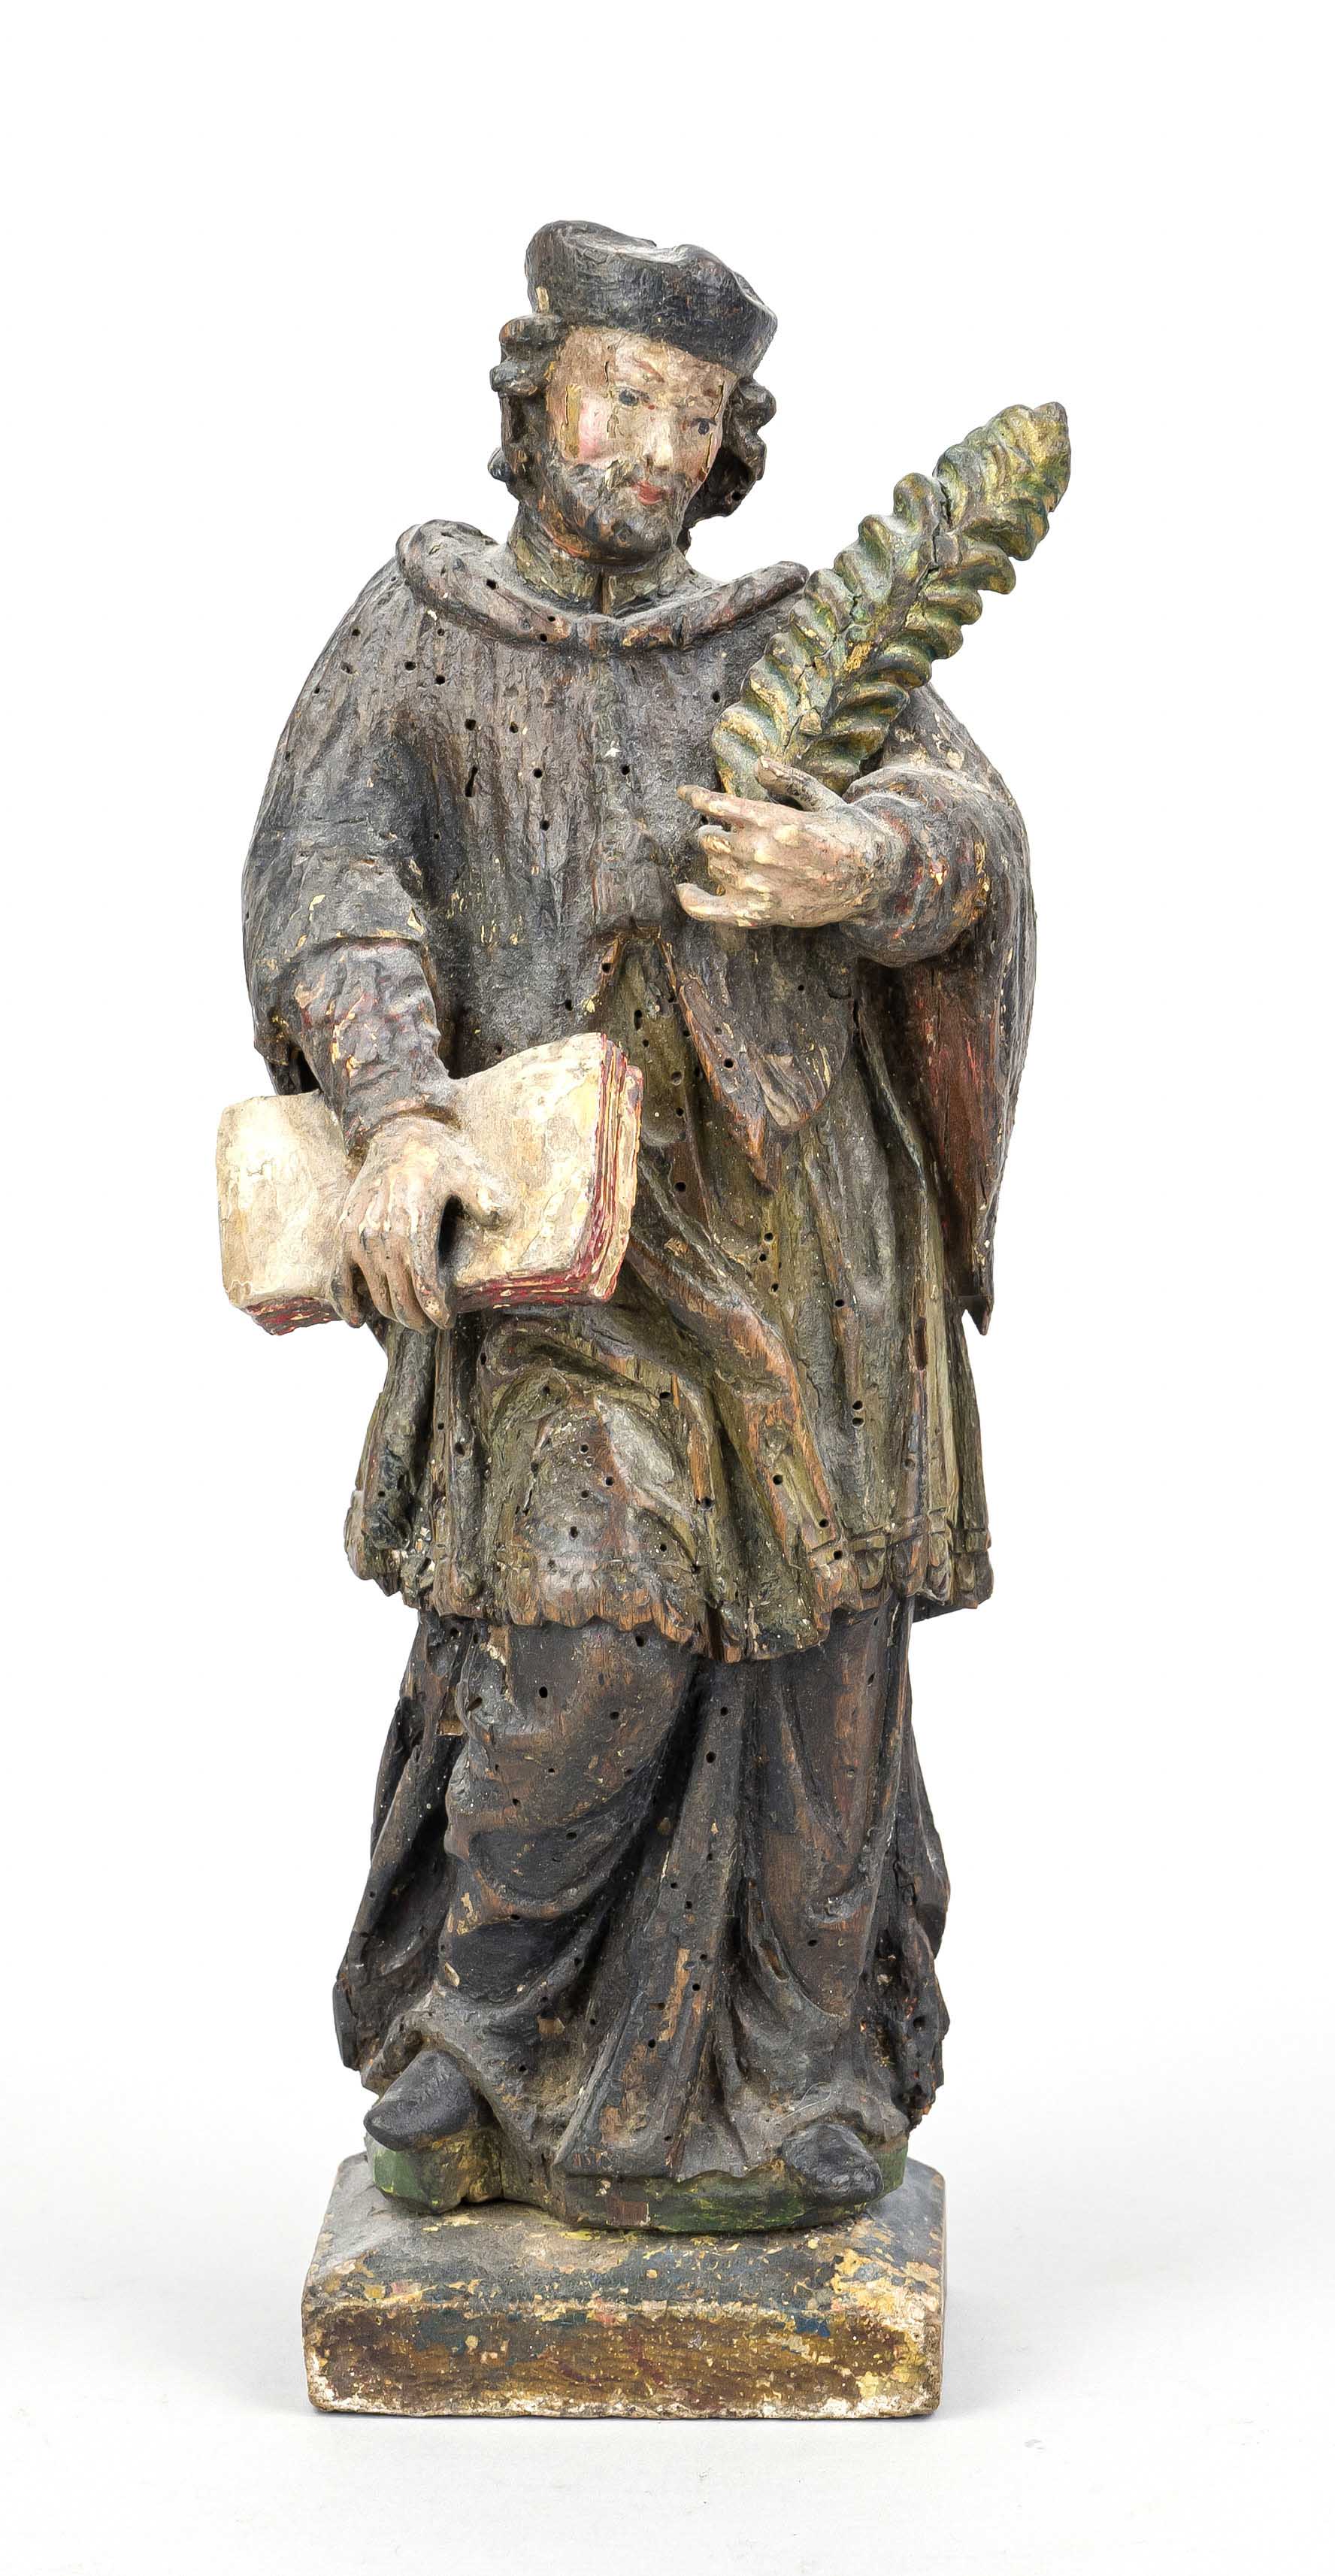 Small devotional figure of the 18th century, St. Nepomuk, wood carved in full relief and painted